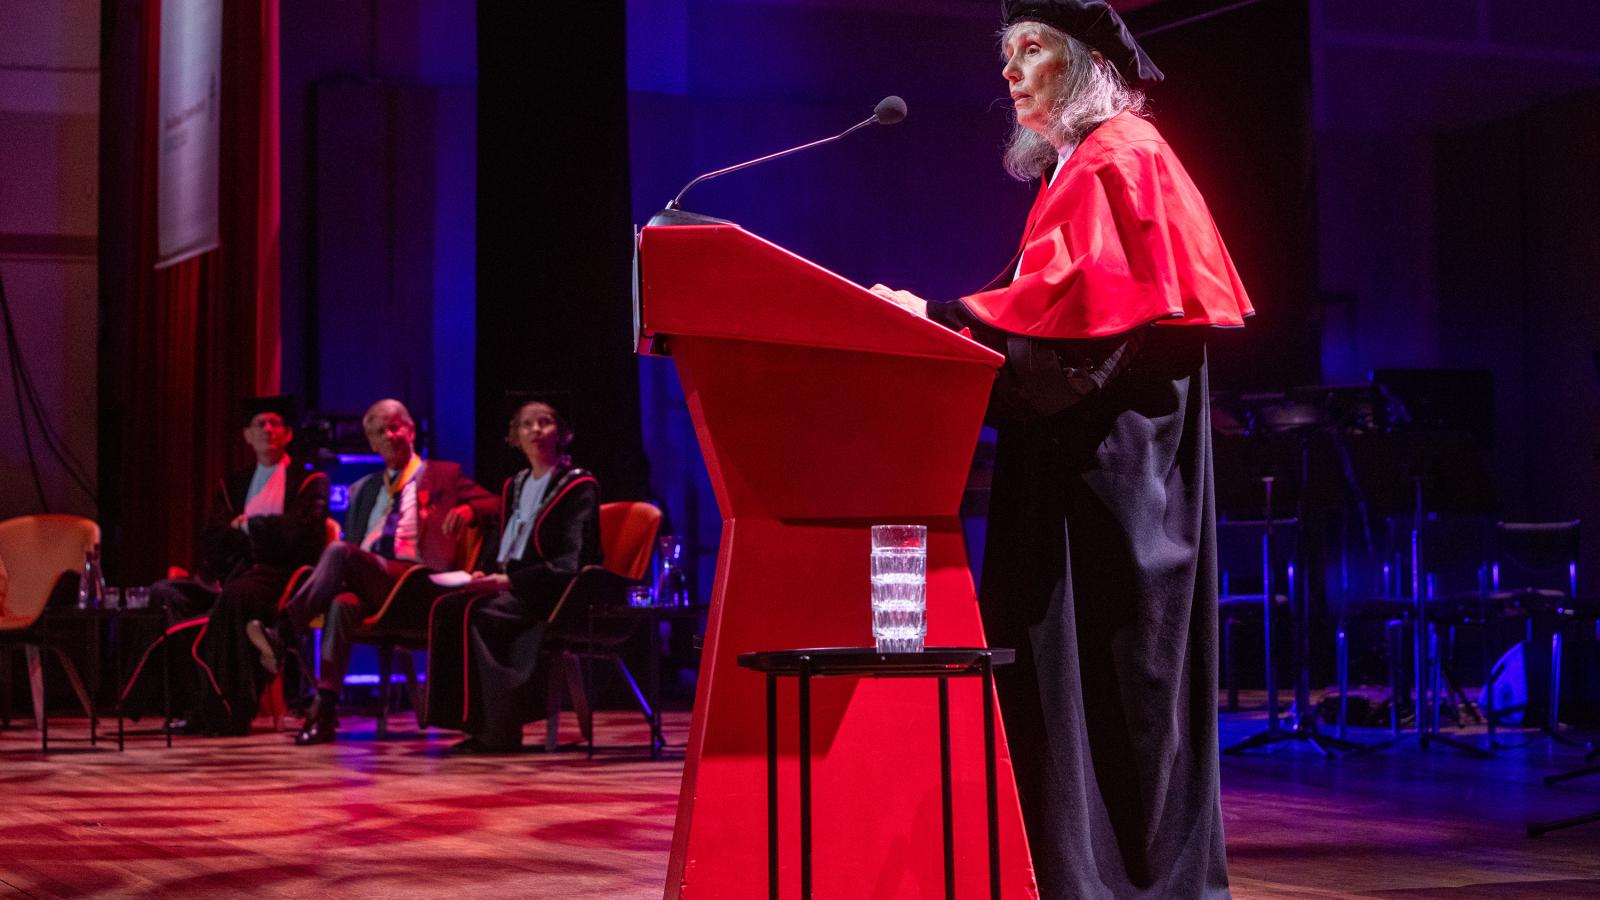 Mary Beckman accepting her honorary doctorate from Radboud University